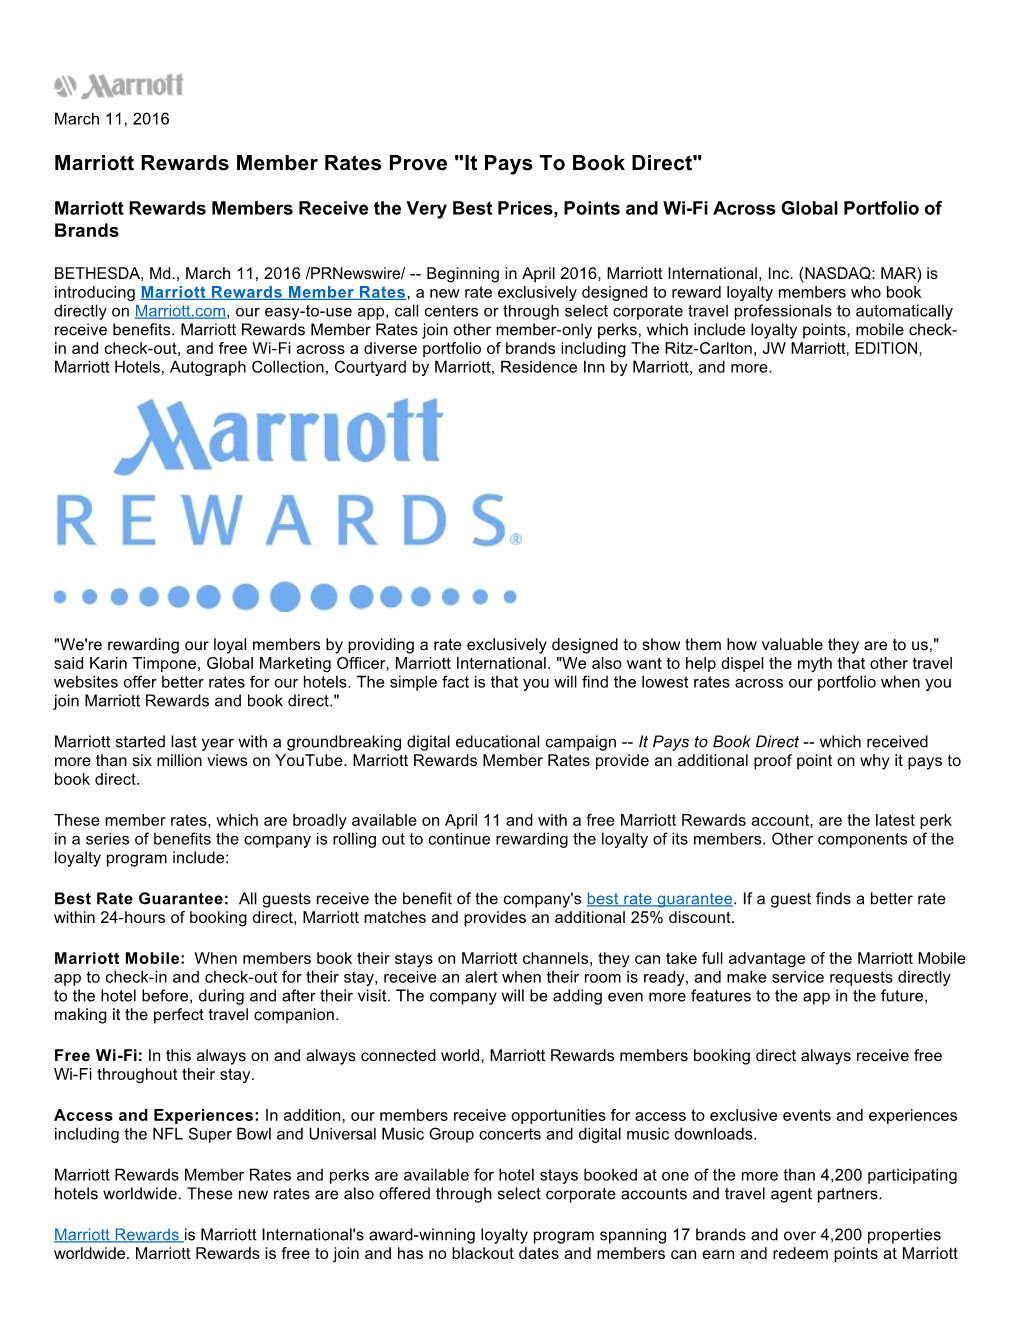 Marriott Rewards Member Rates Prove "It Pays to Book Direct"